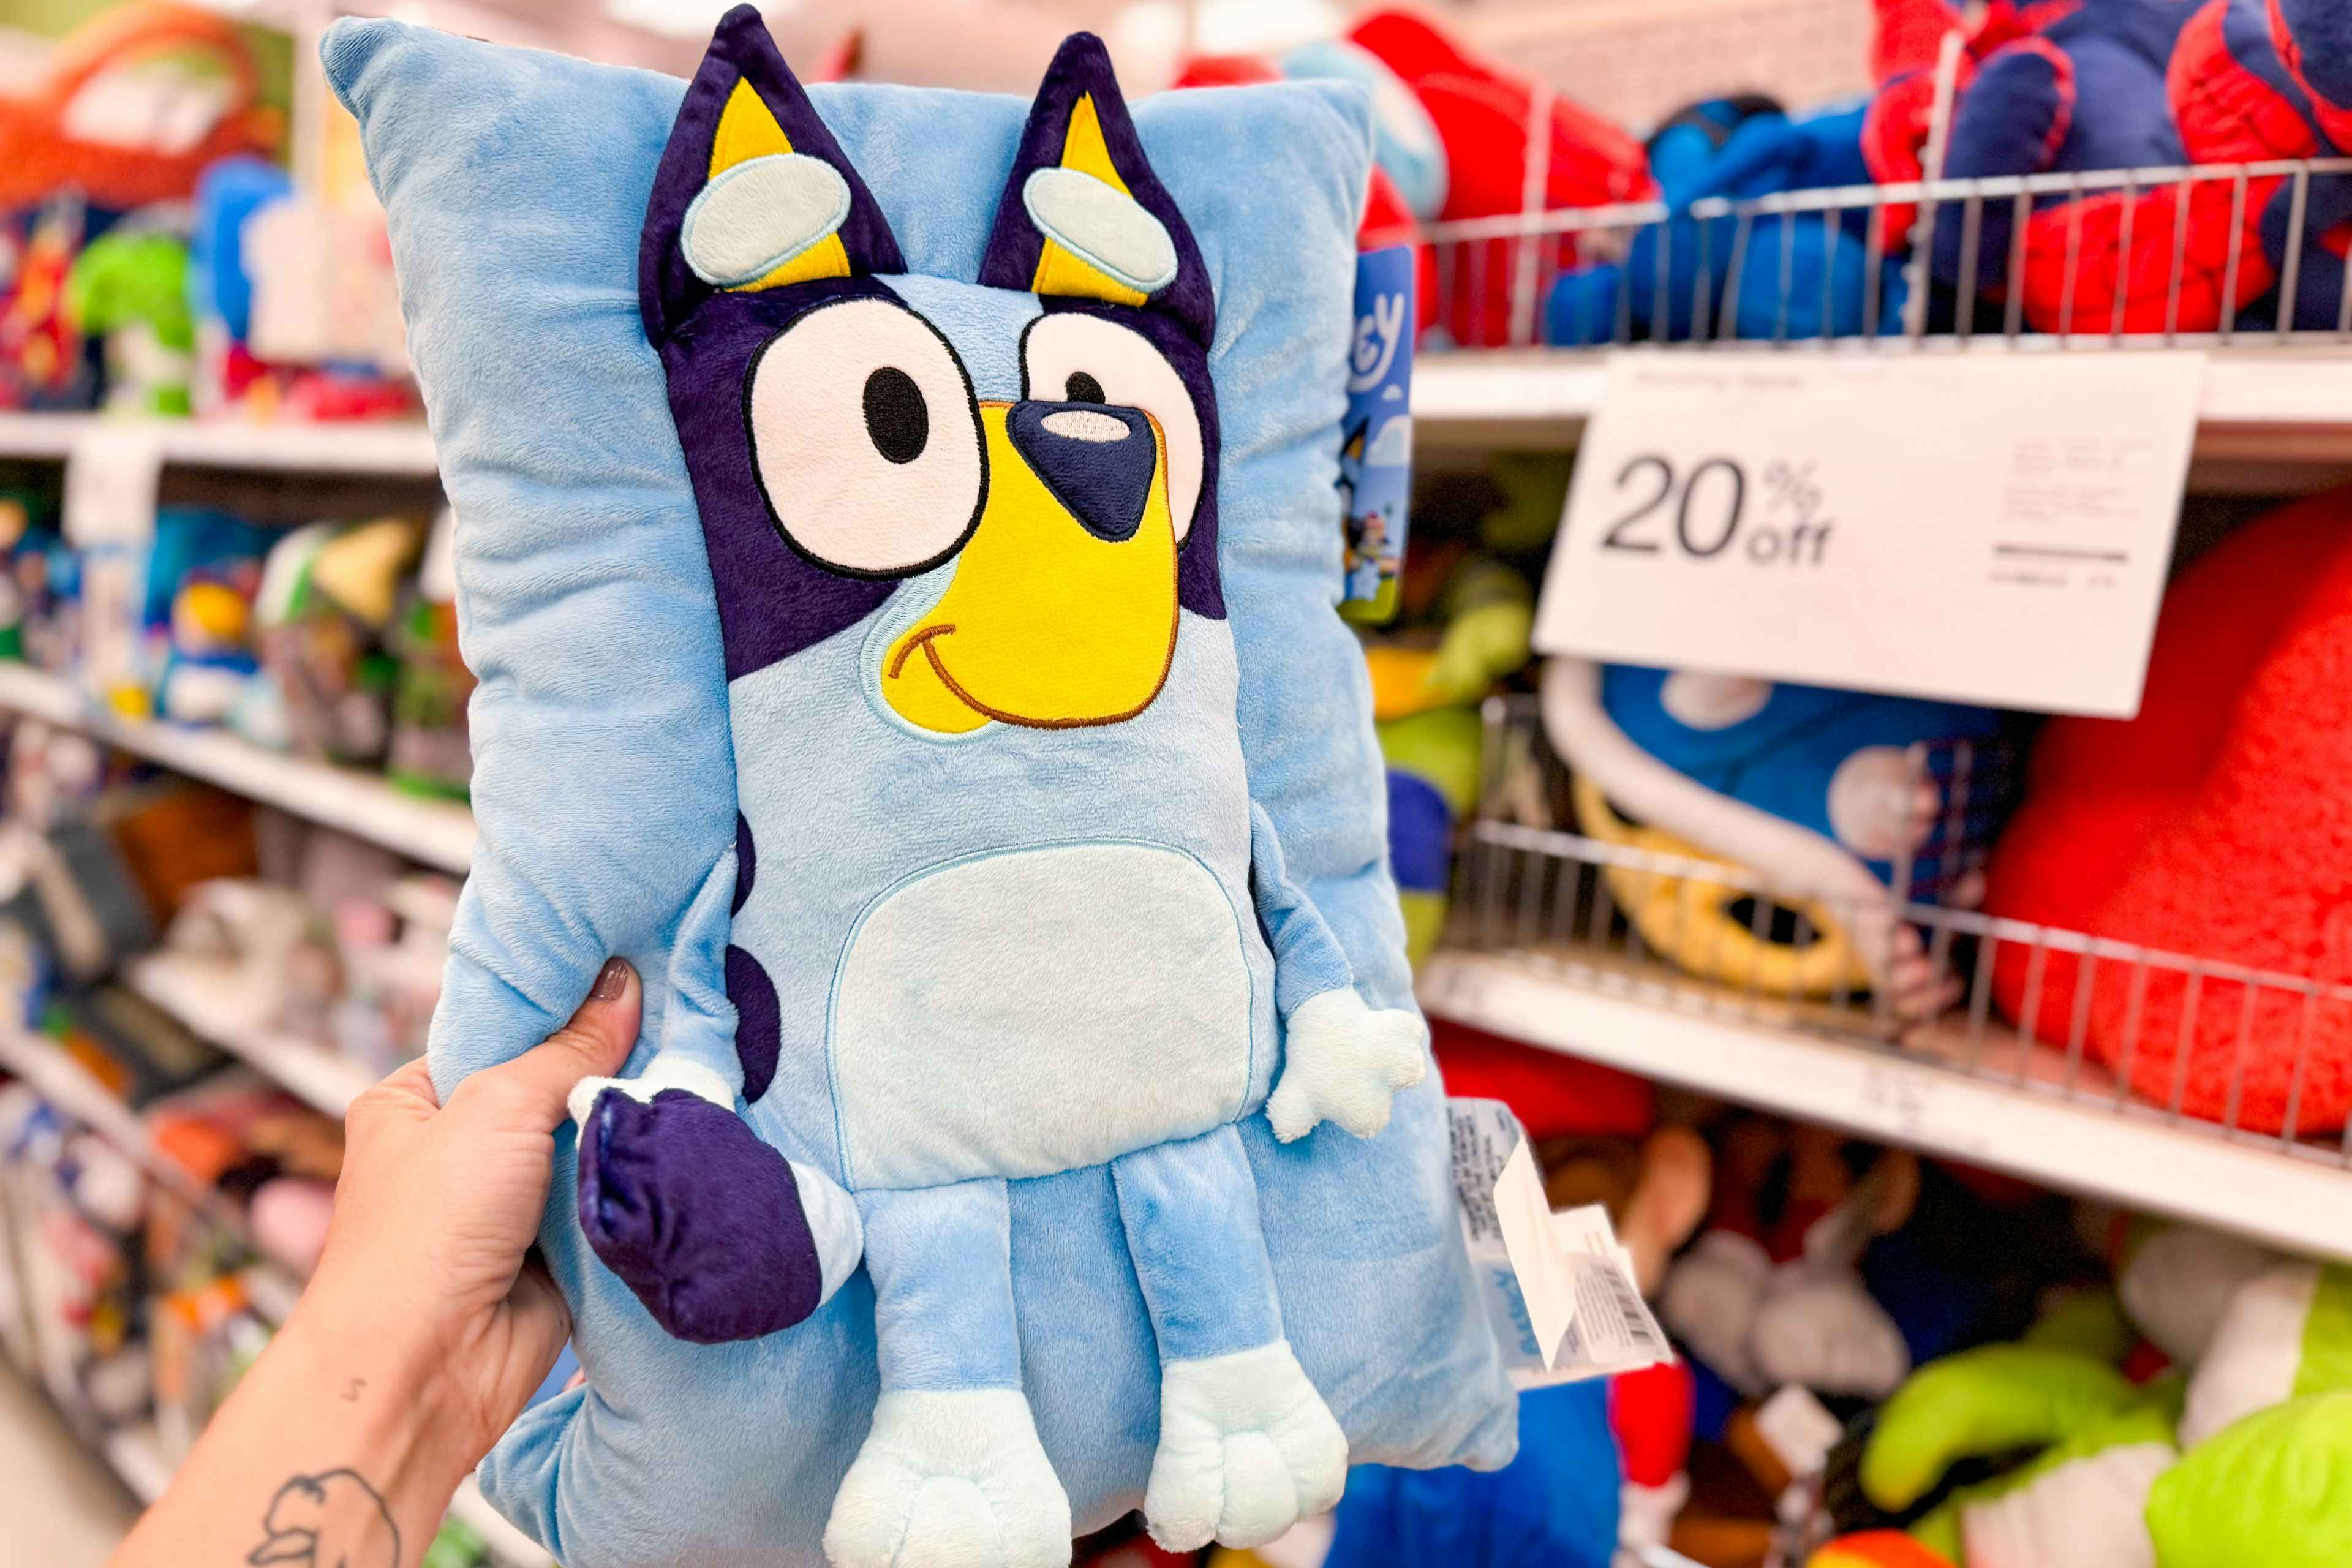 Targey Bluey Pillow Buddy, held up in front of other plush character pillows at Target